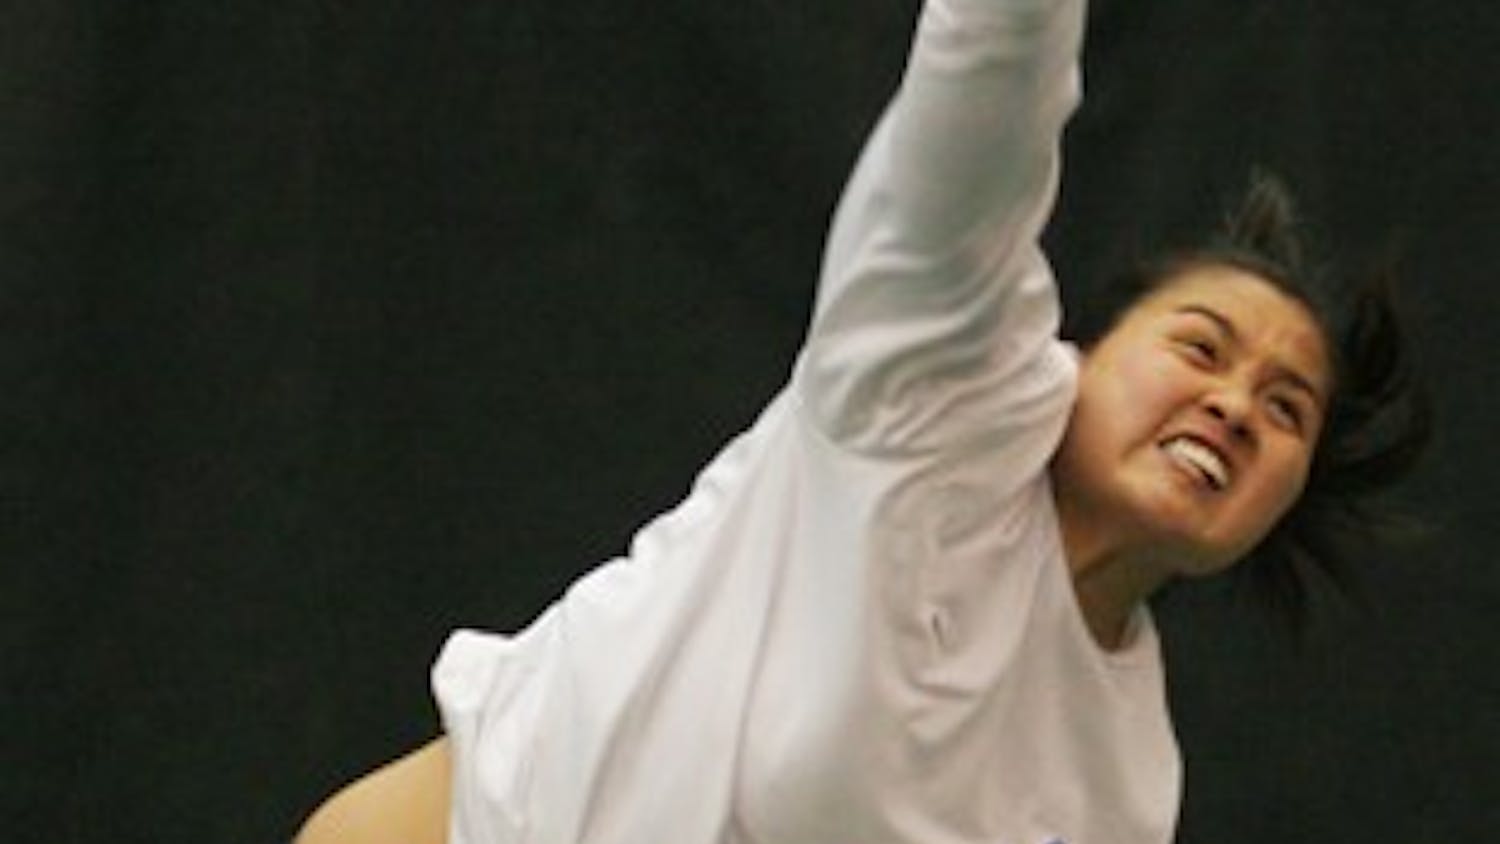 Katrina Tsang came away with a win in her singles match against N.C. State. DTH/Andrew Dunn